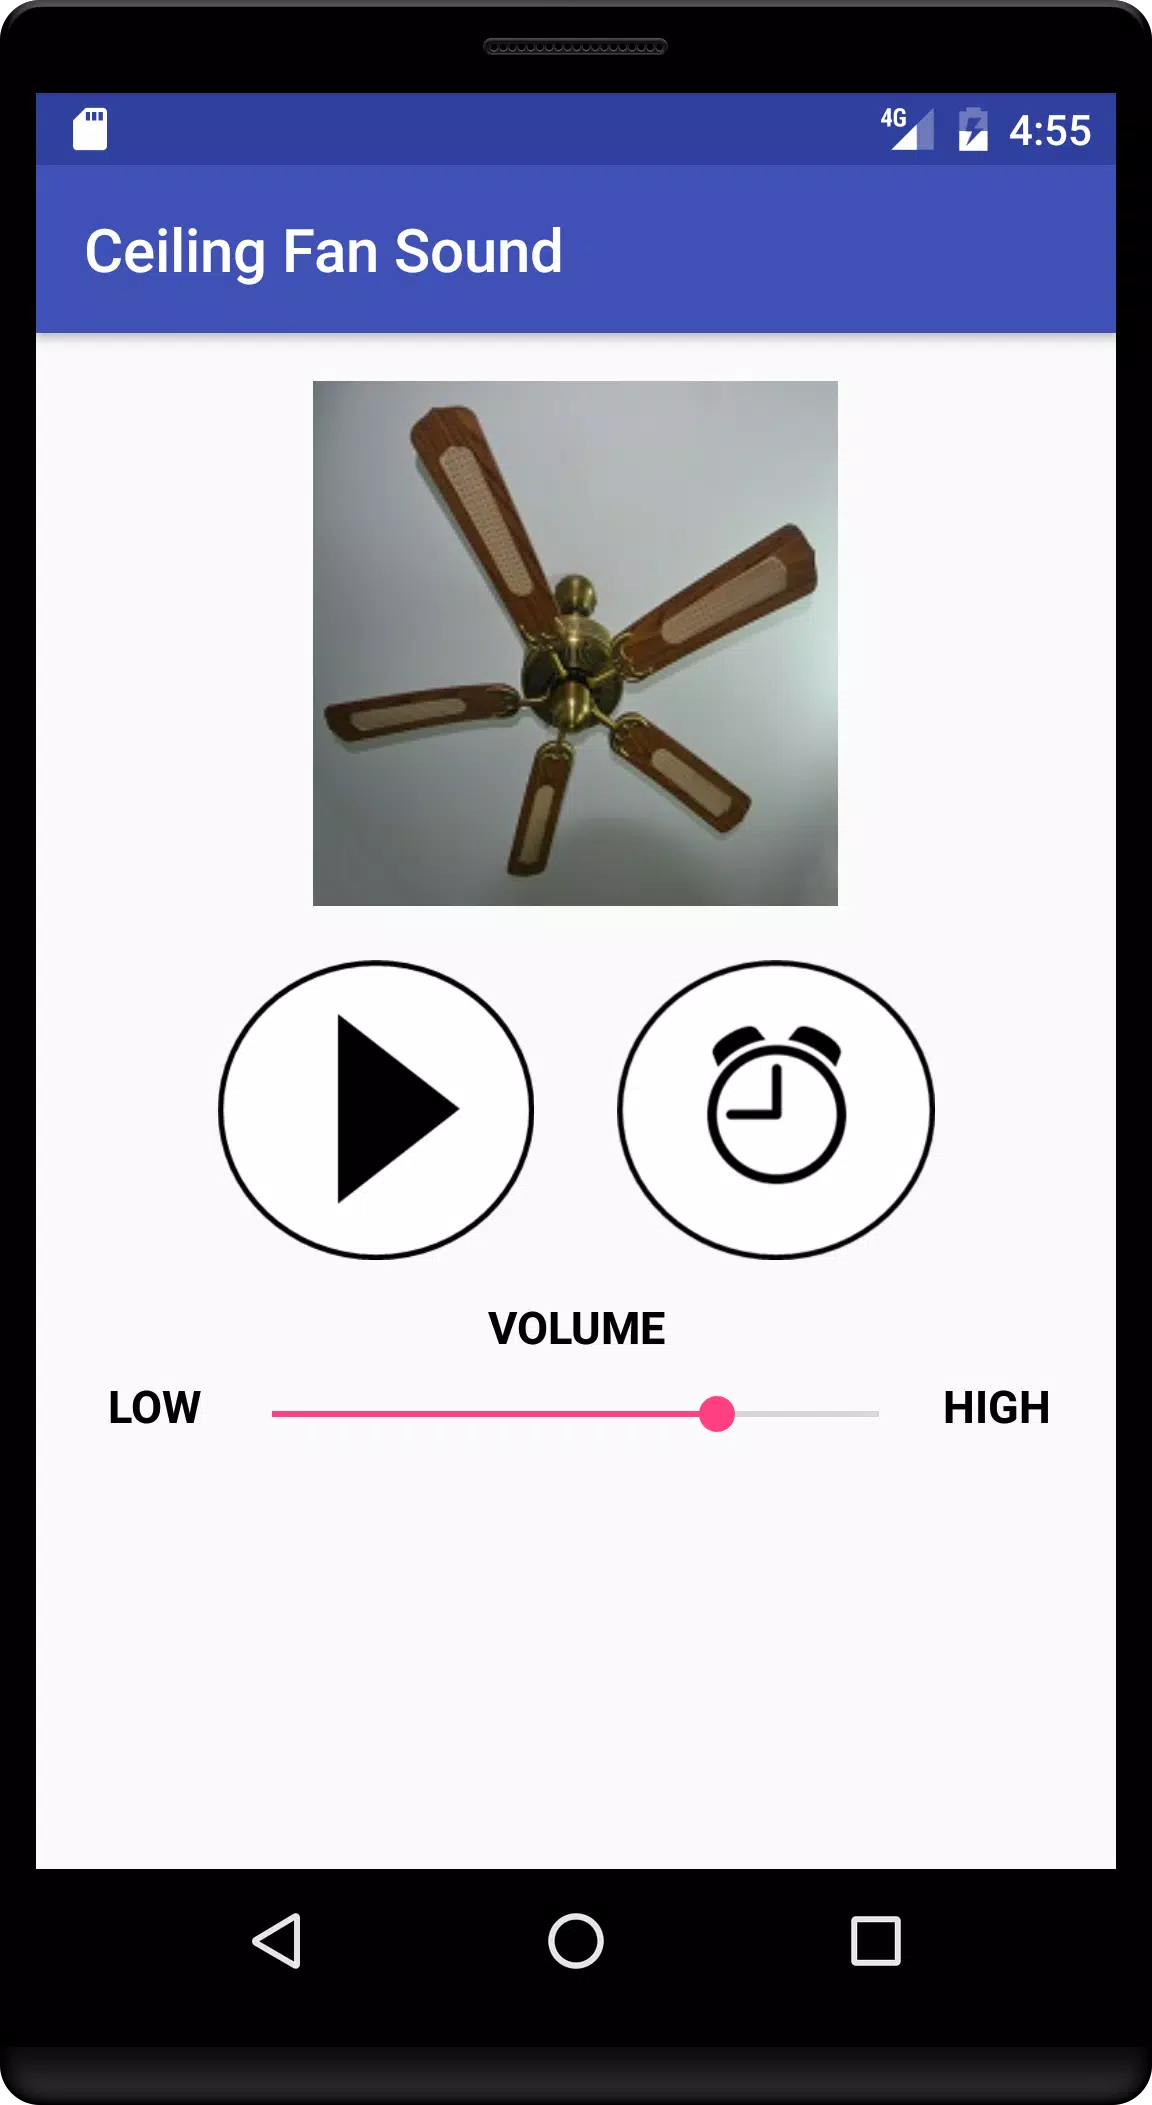 Ceiling Fan Sound for Android - APK Download